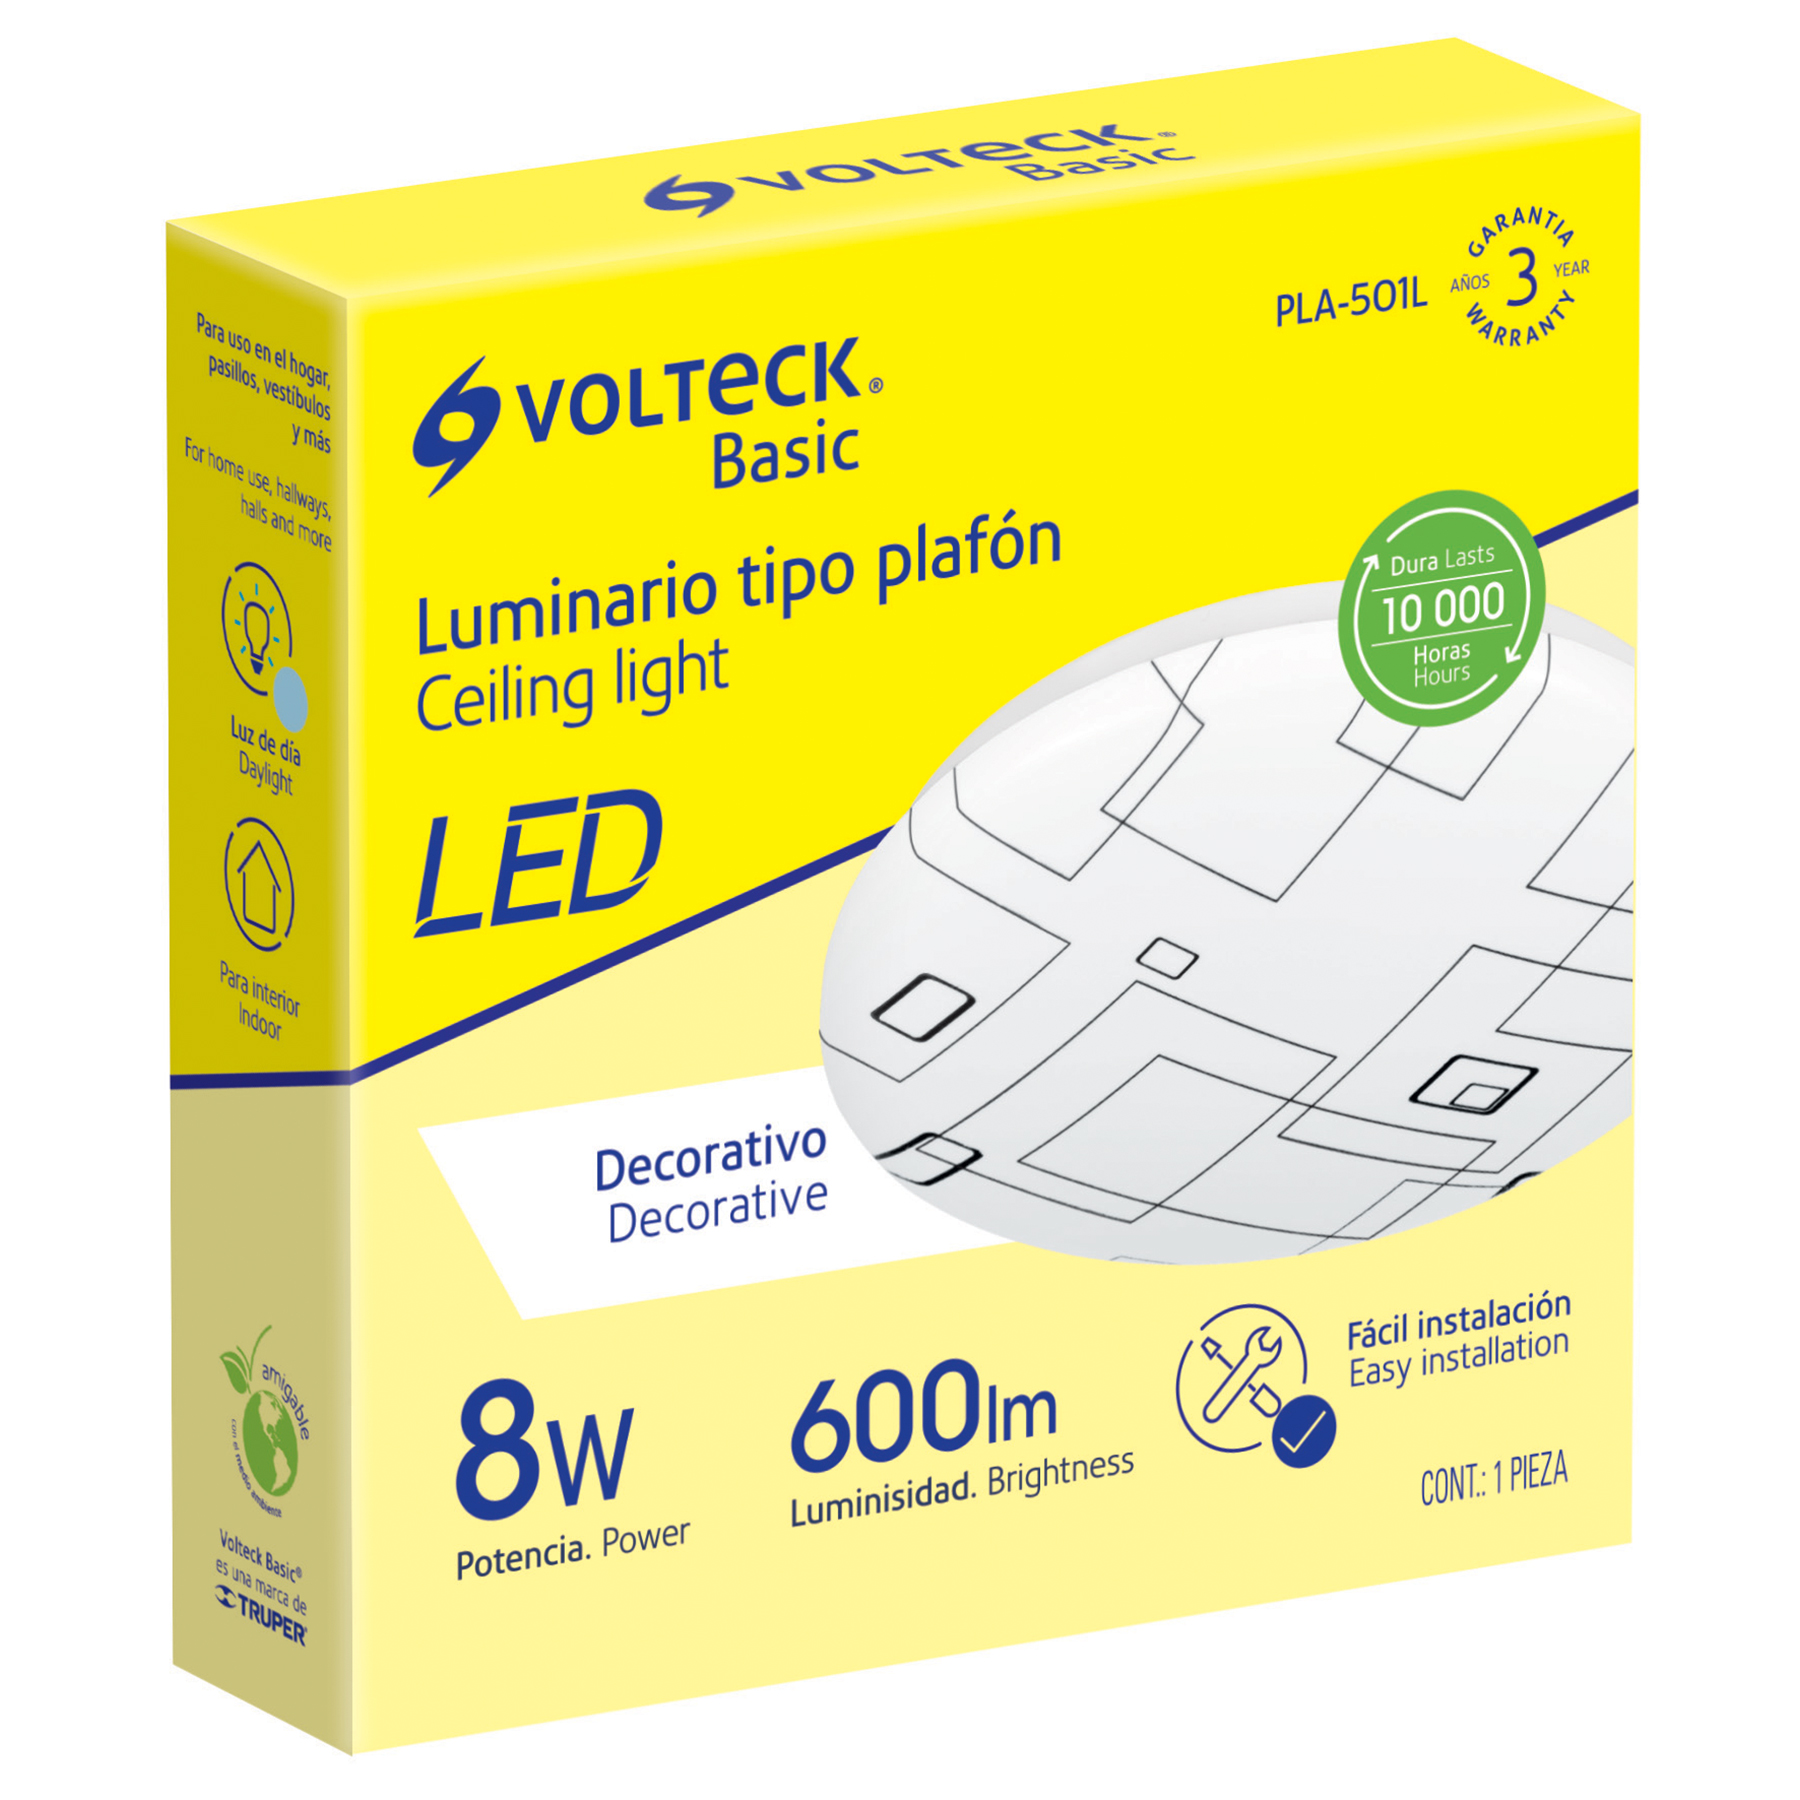 Volteck, Decorative Surface Mounted LED Luminaires, Ceiling Type, PVC Screen.